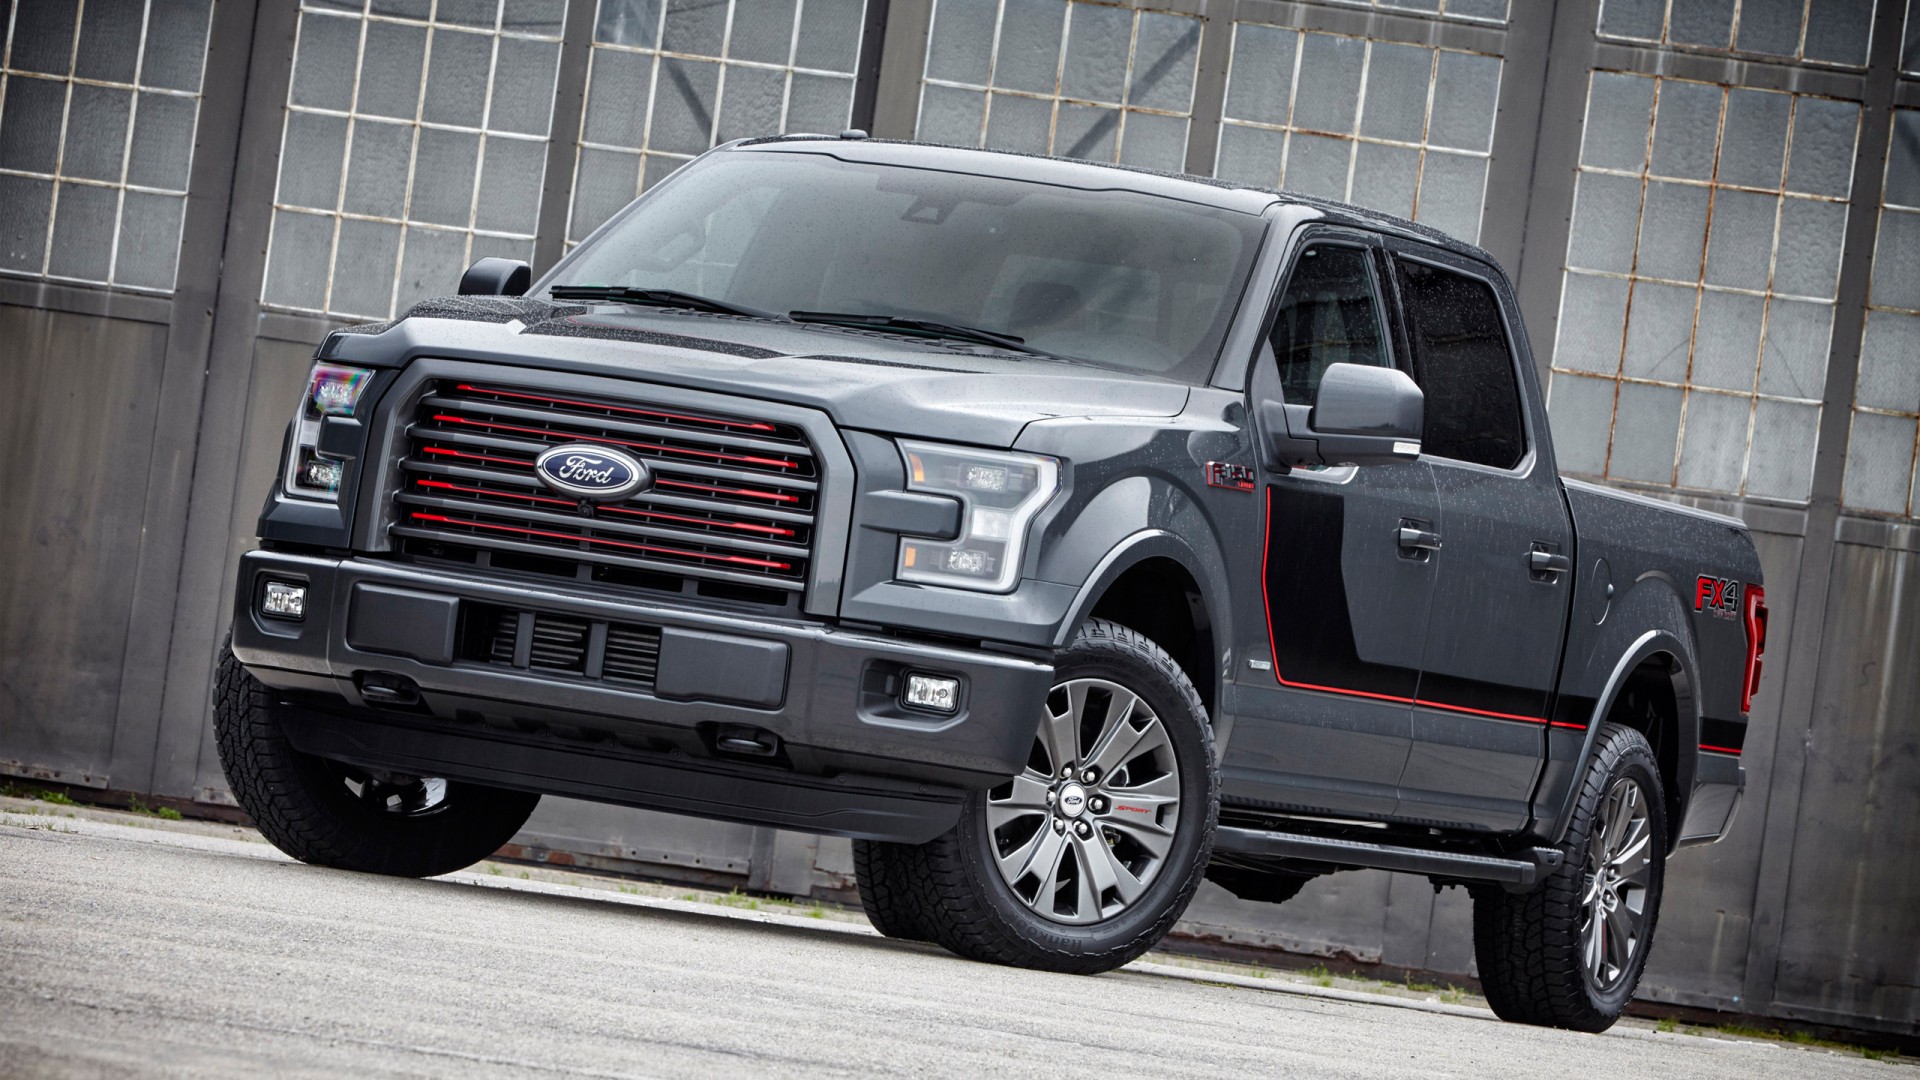 2016 Ford F 150 Lariat Appearance Package Wallpaper | HD Car Wallpapers